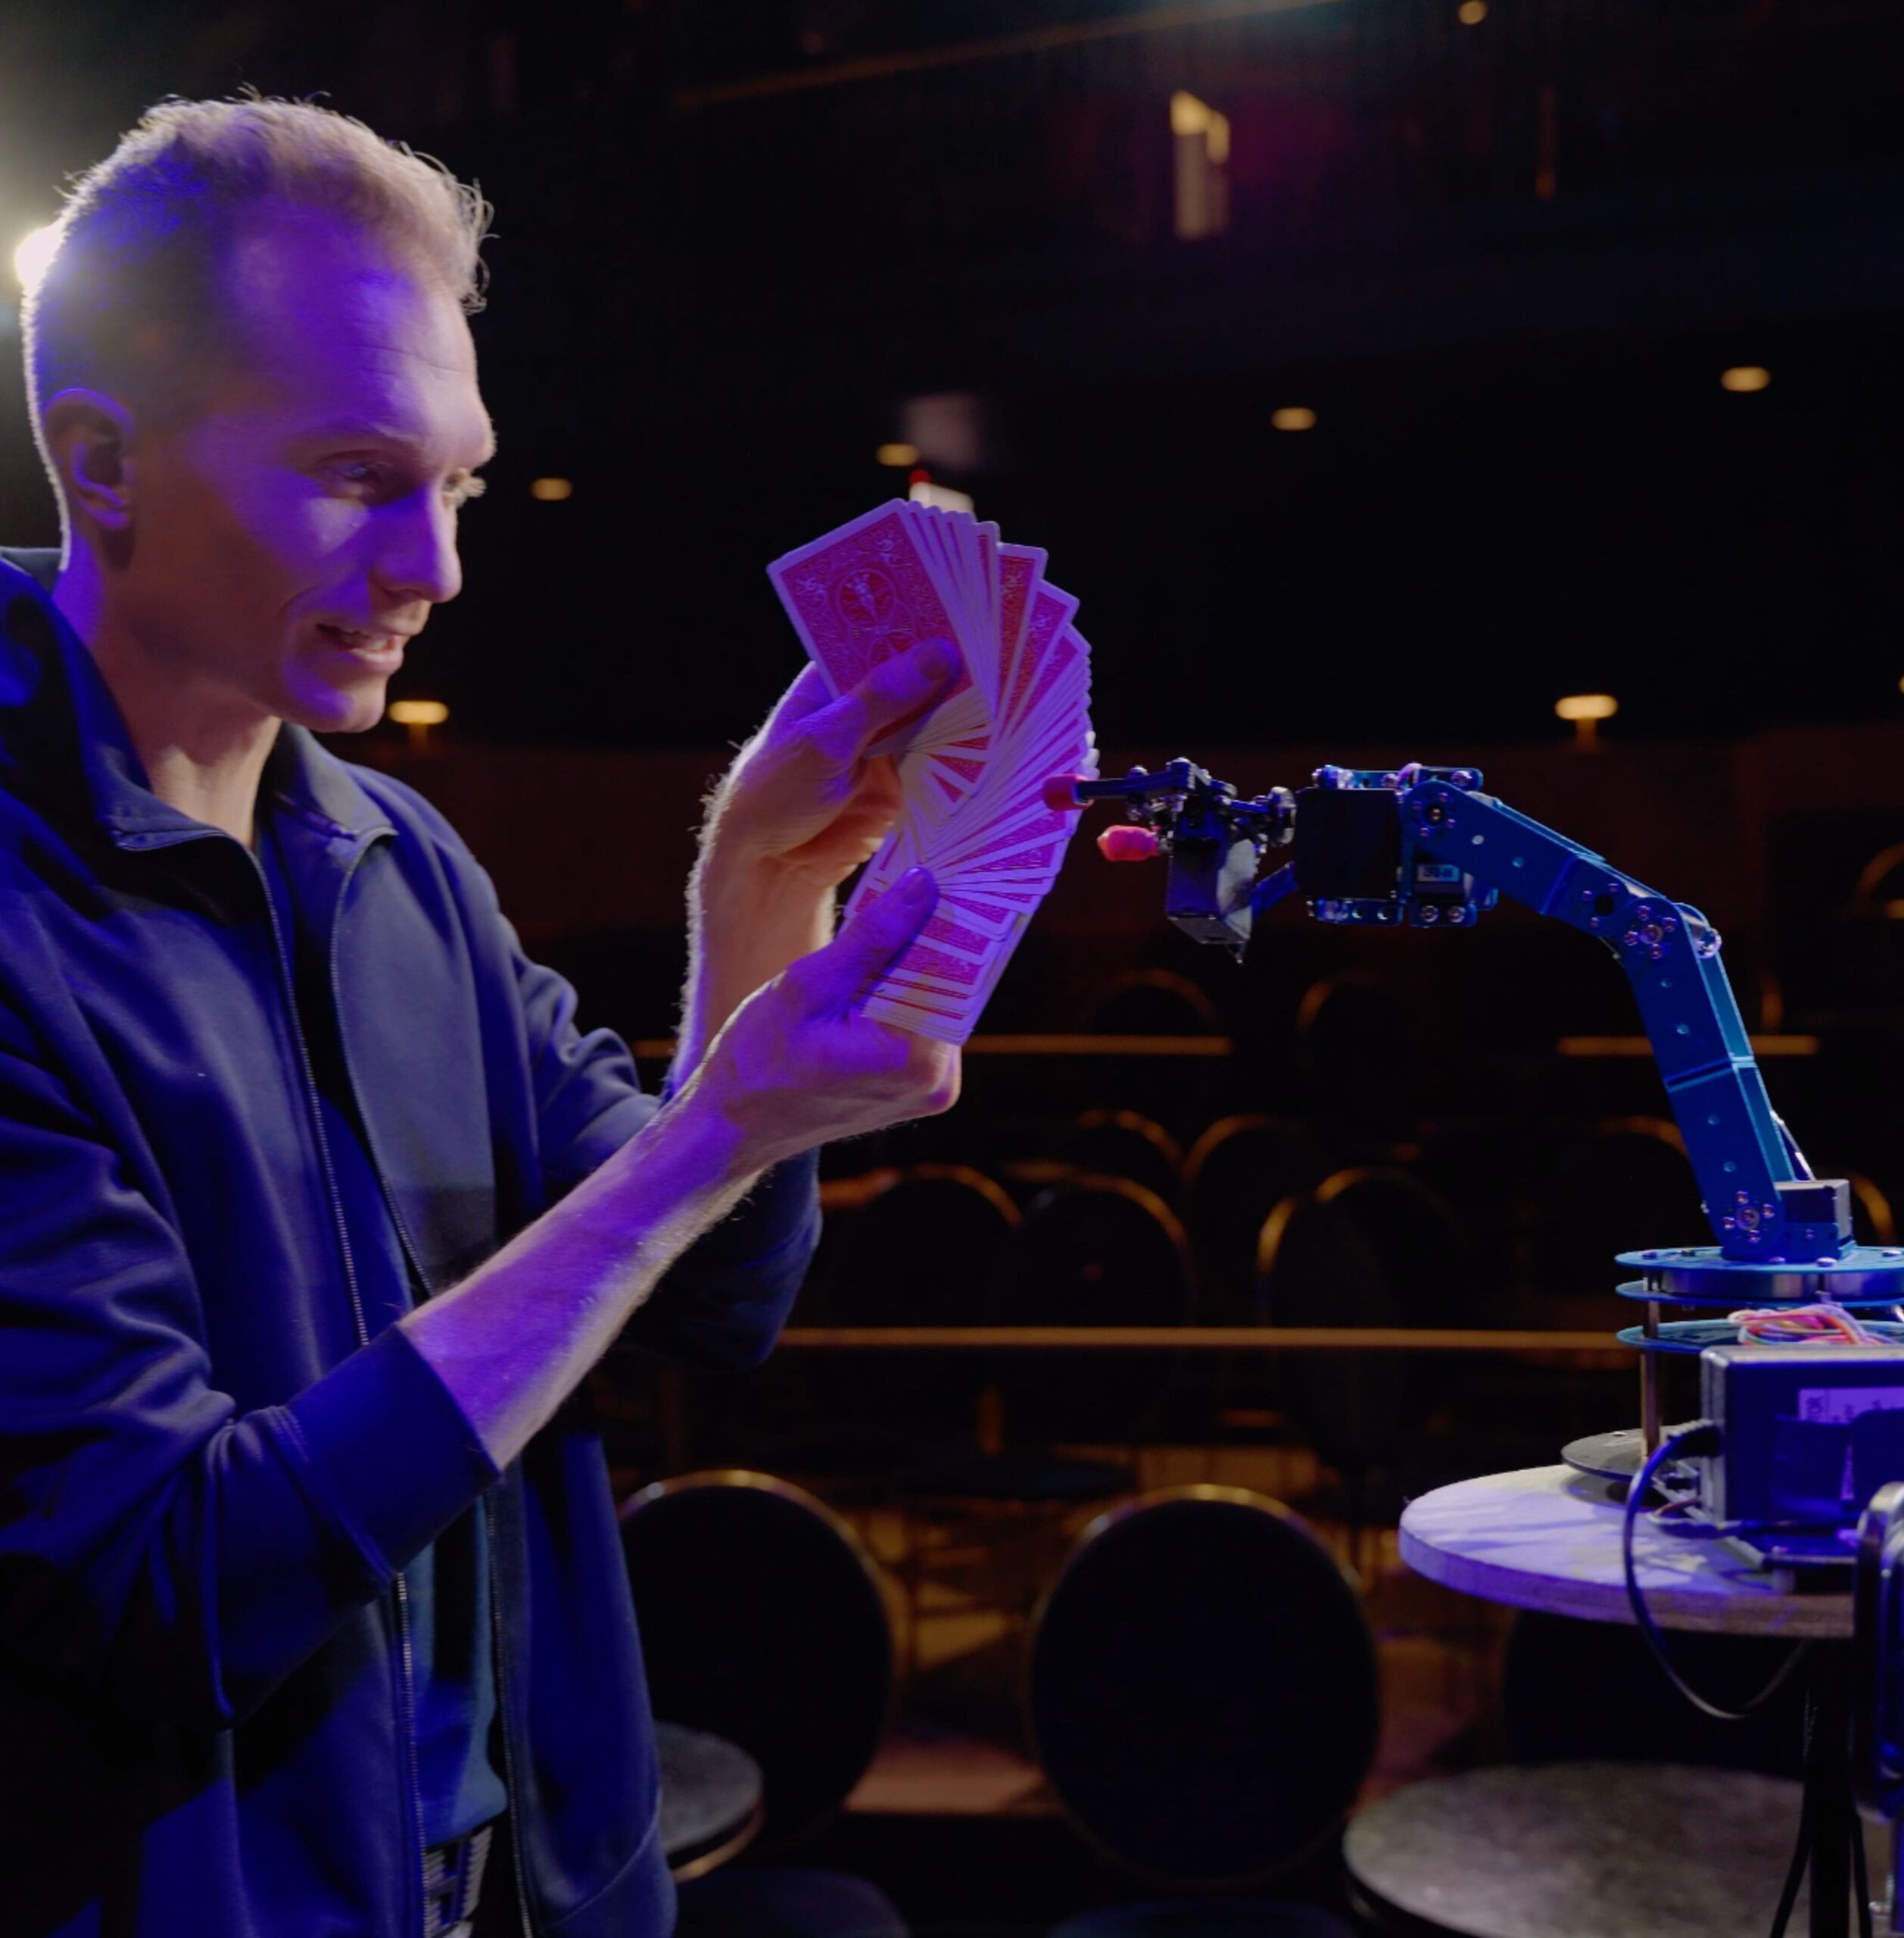 Trigg performing a card trick with a robot arm. 